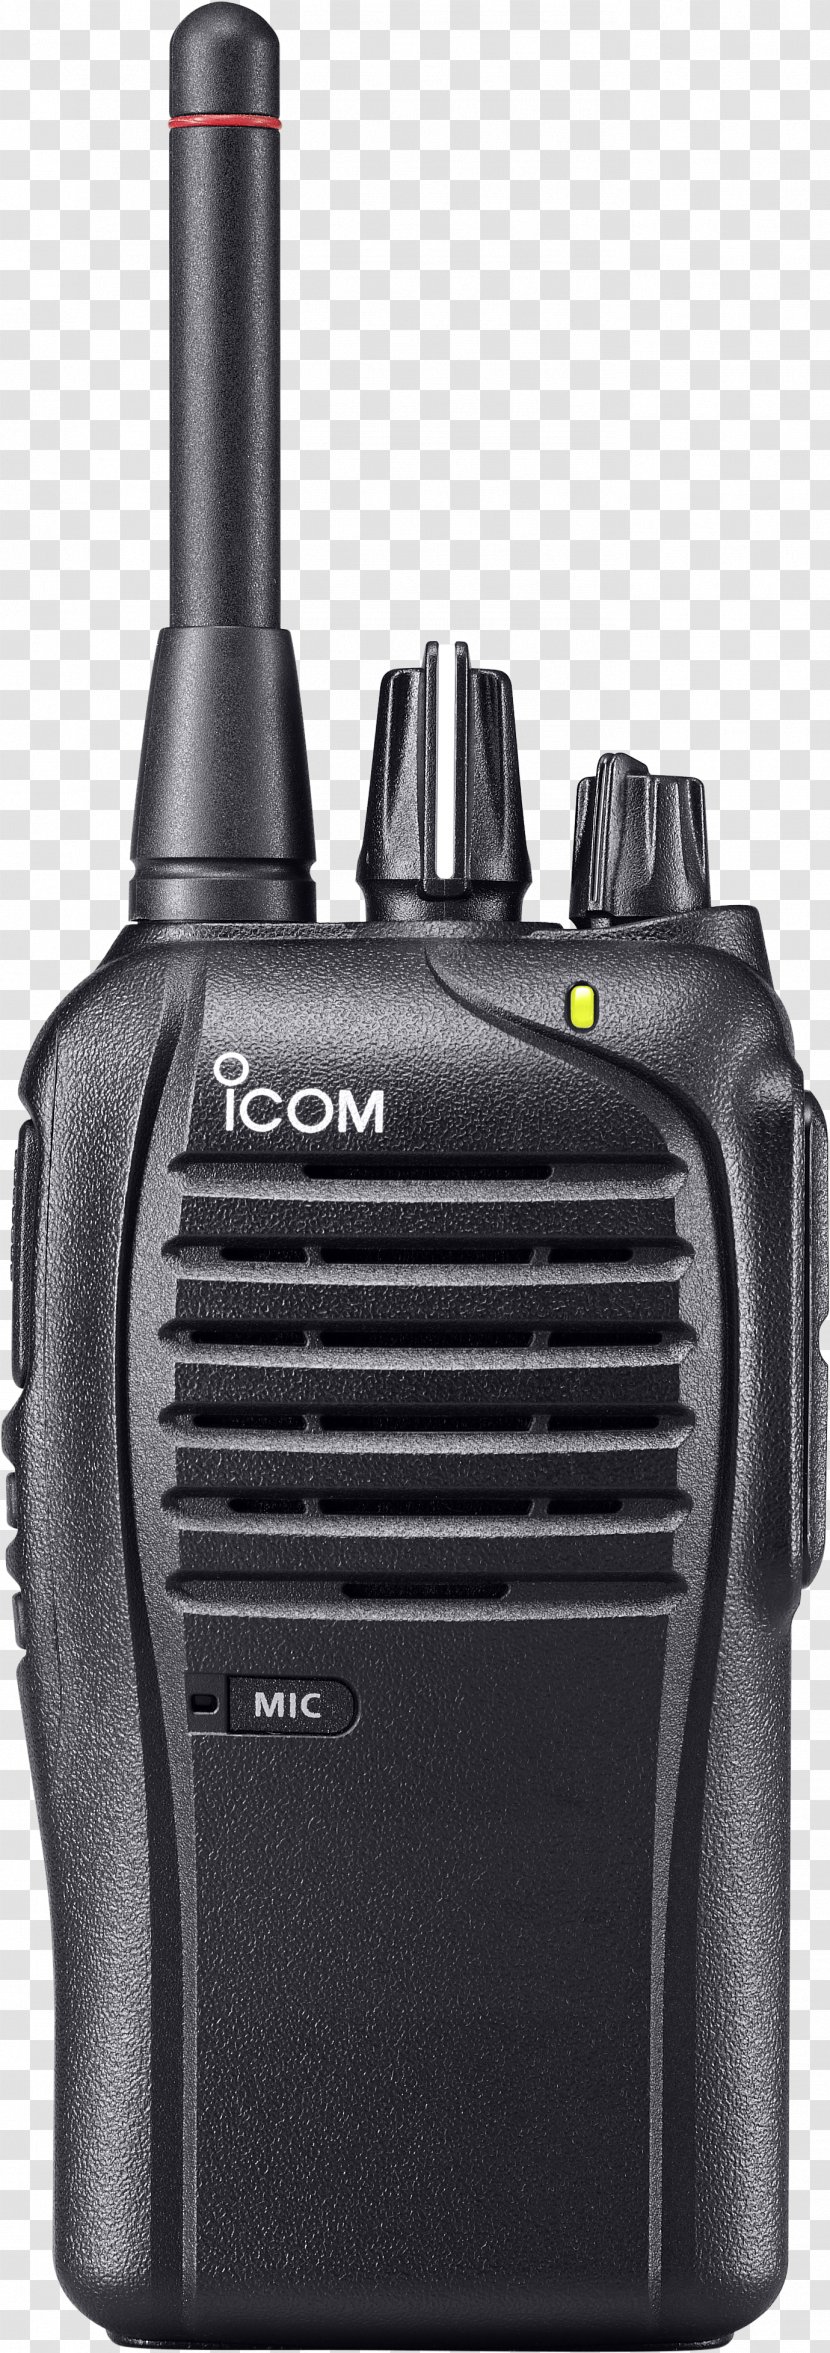 Two-way Radio PMR446 Icom Incorporated Walkie-talkie - Professional Mobile Transparent PNG